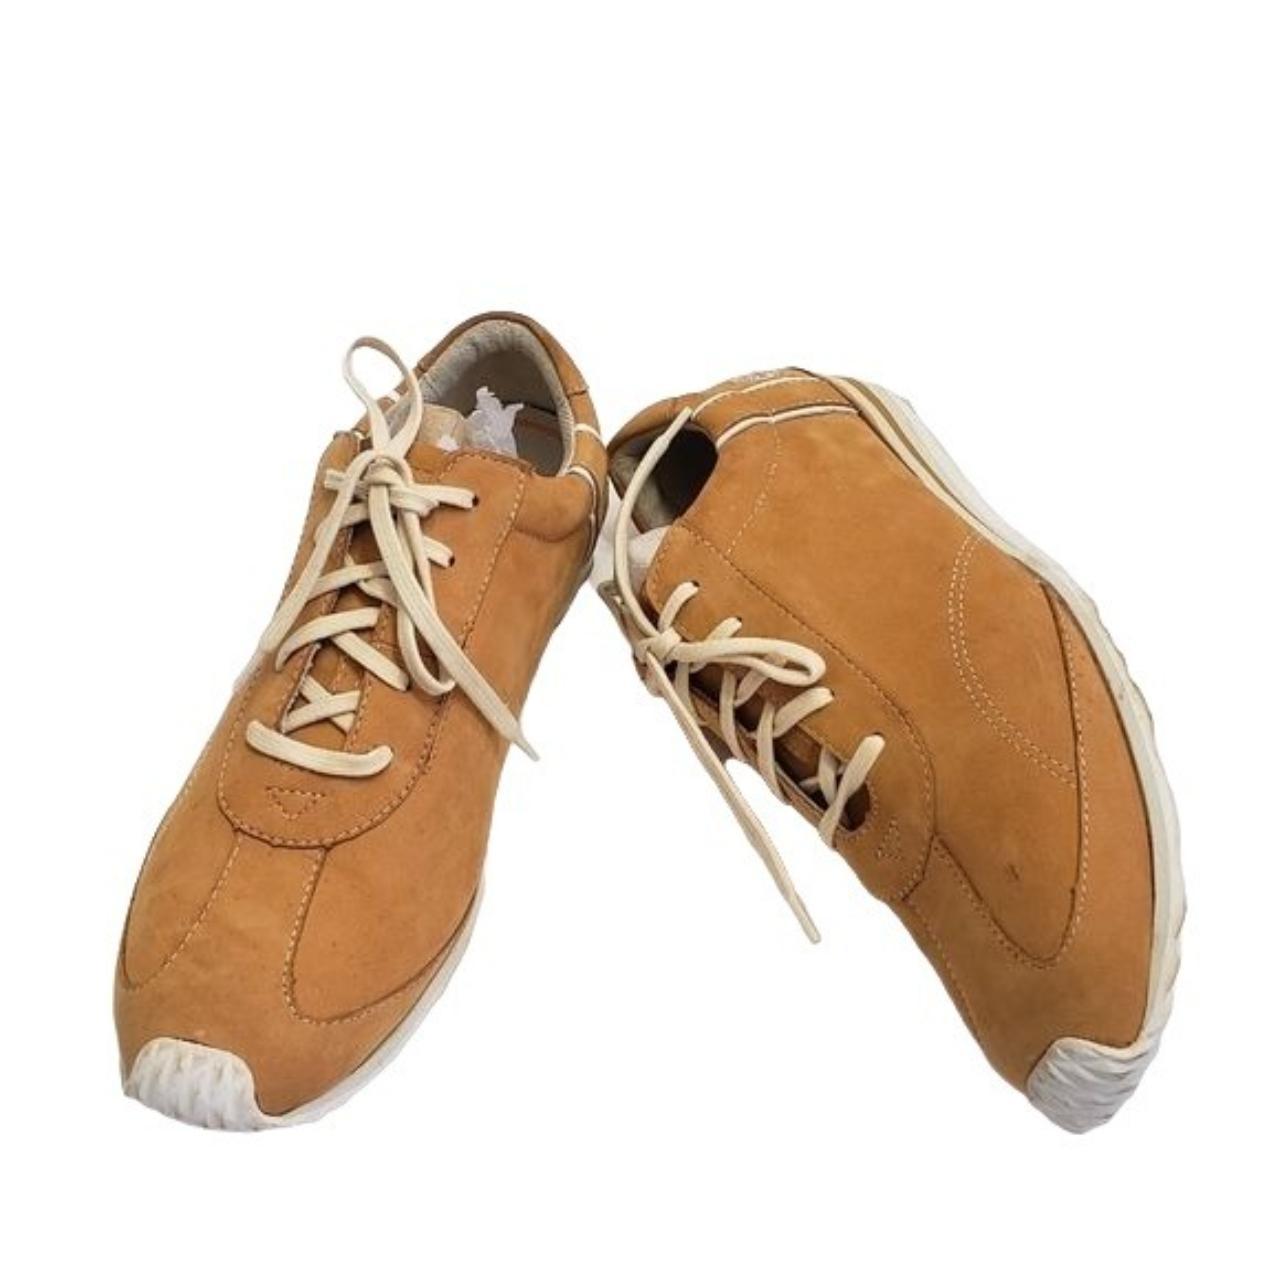 Product Image 1 - TIMBERLAND tan smart comfort sneaker

Lace